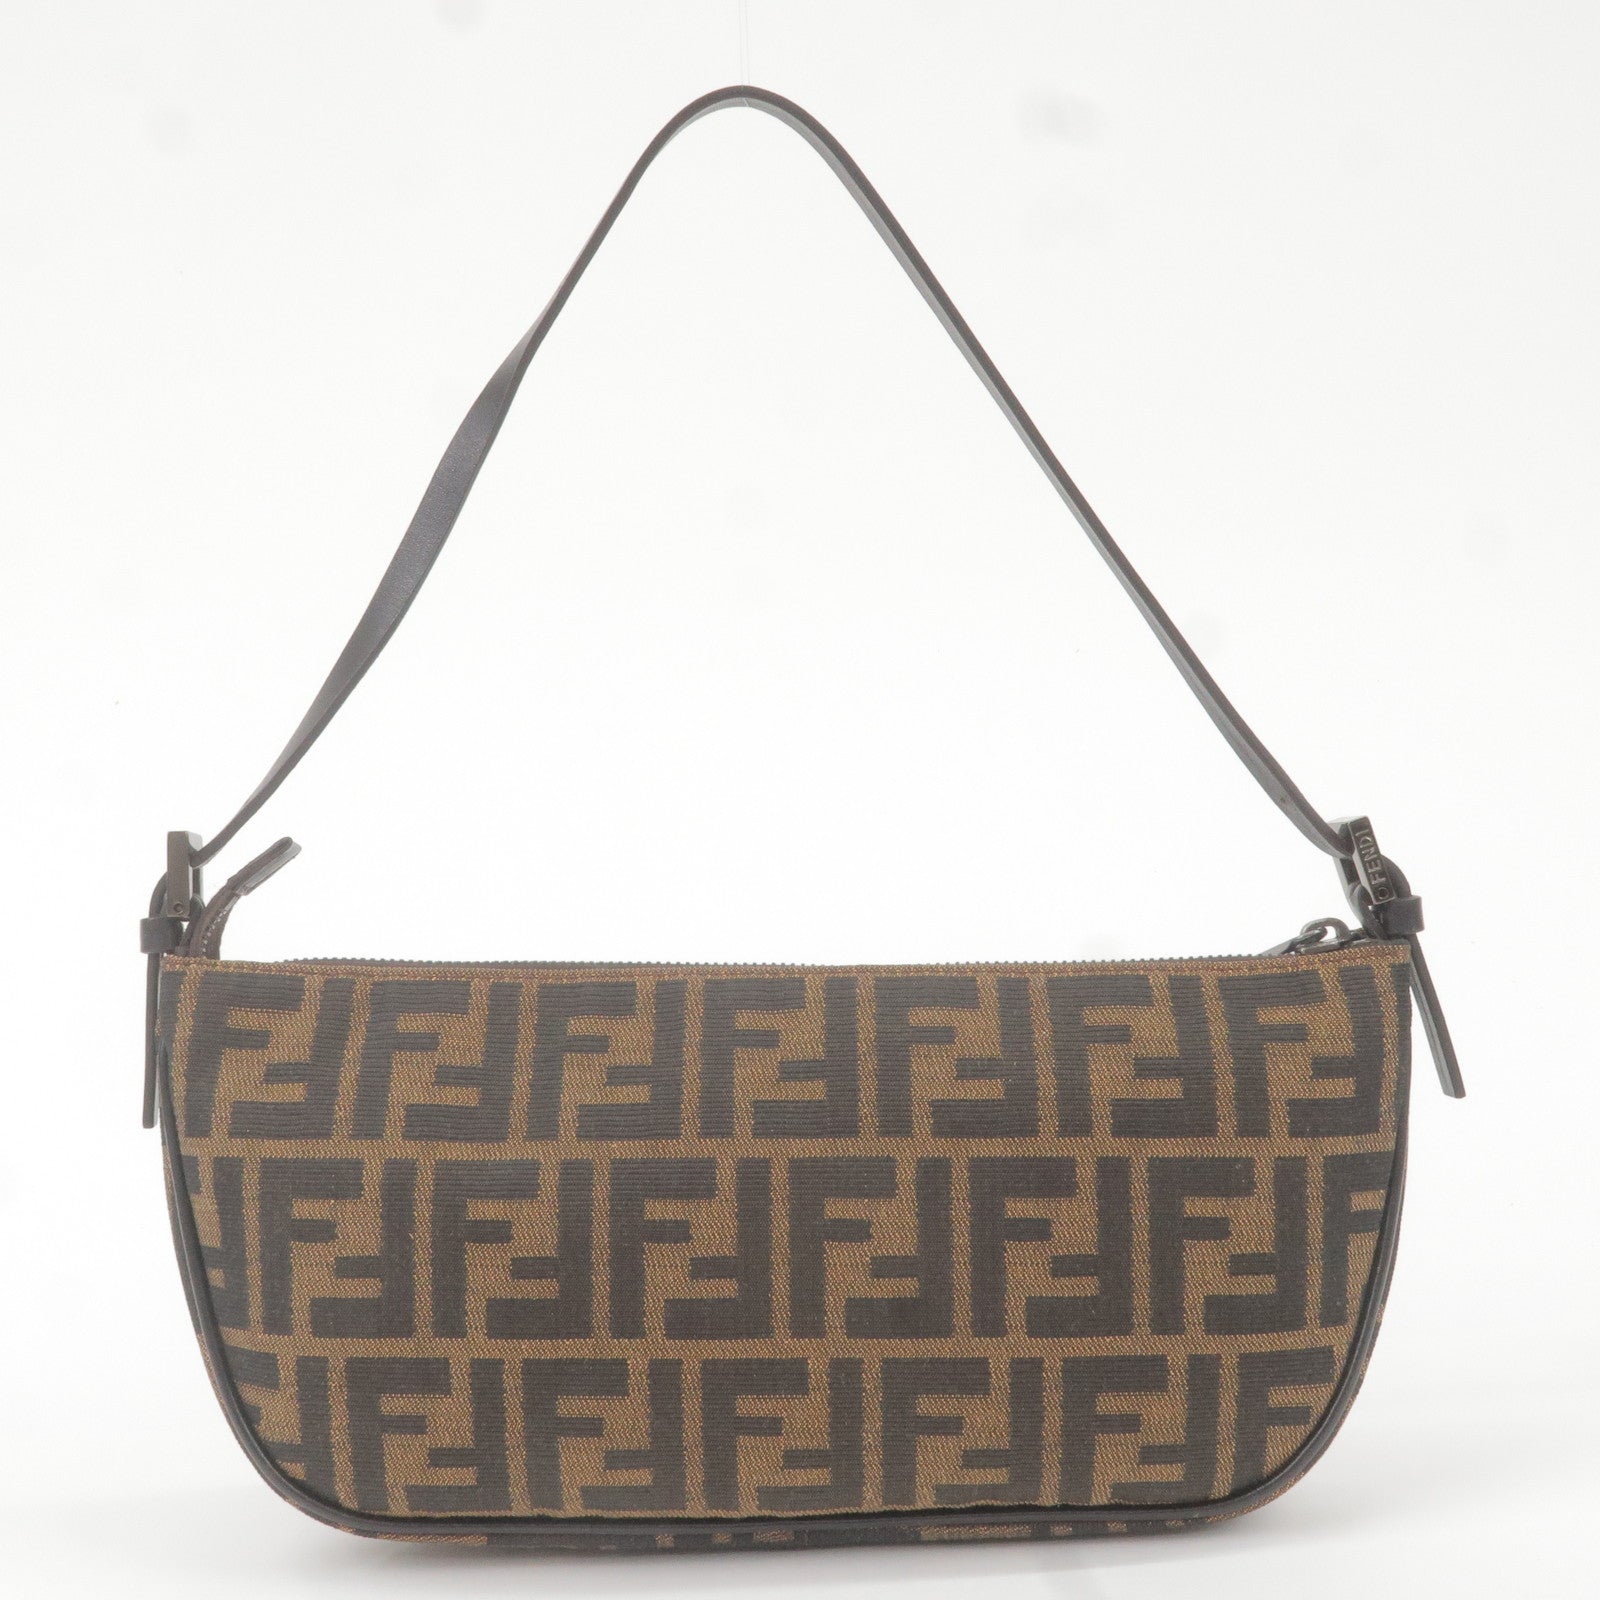 Flat Pouch - Brown fabric pouch